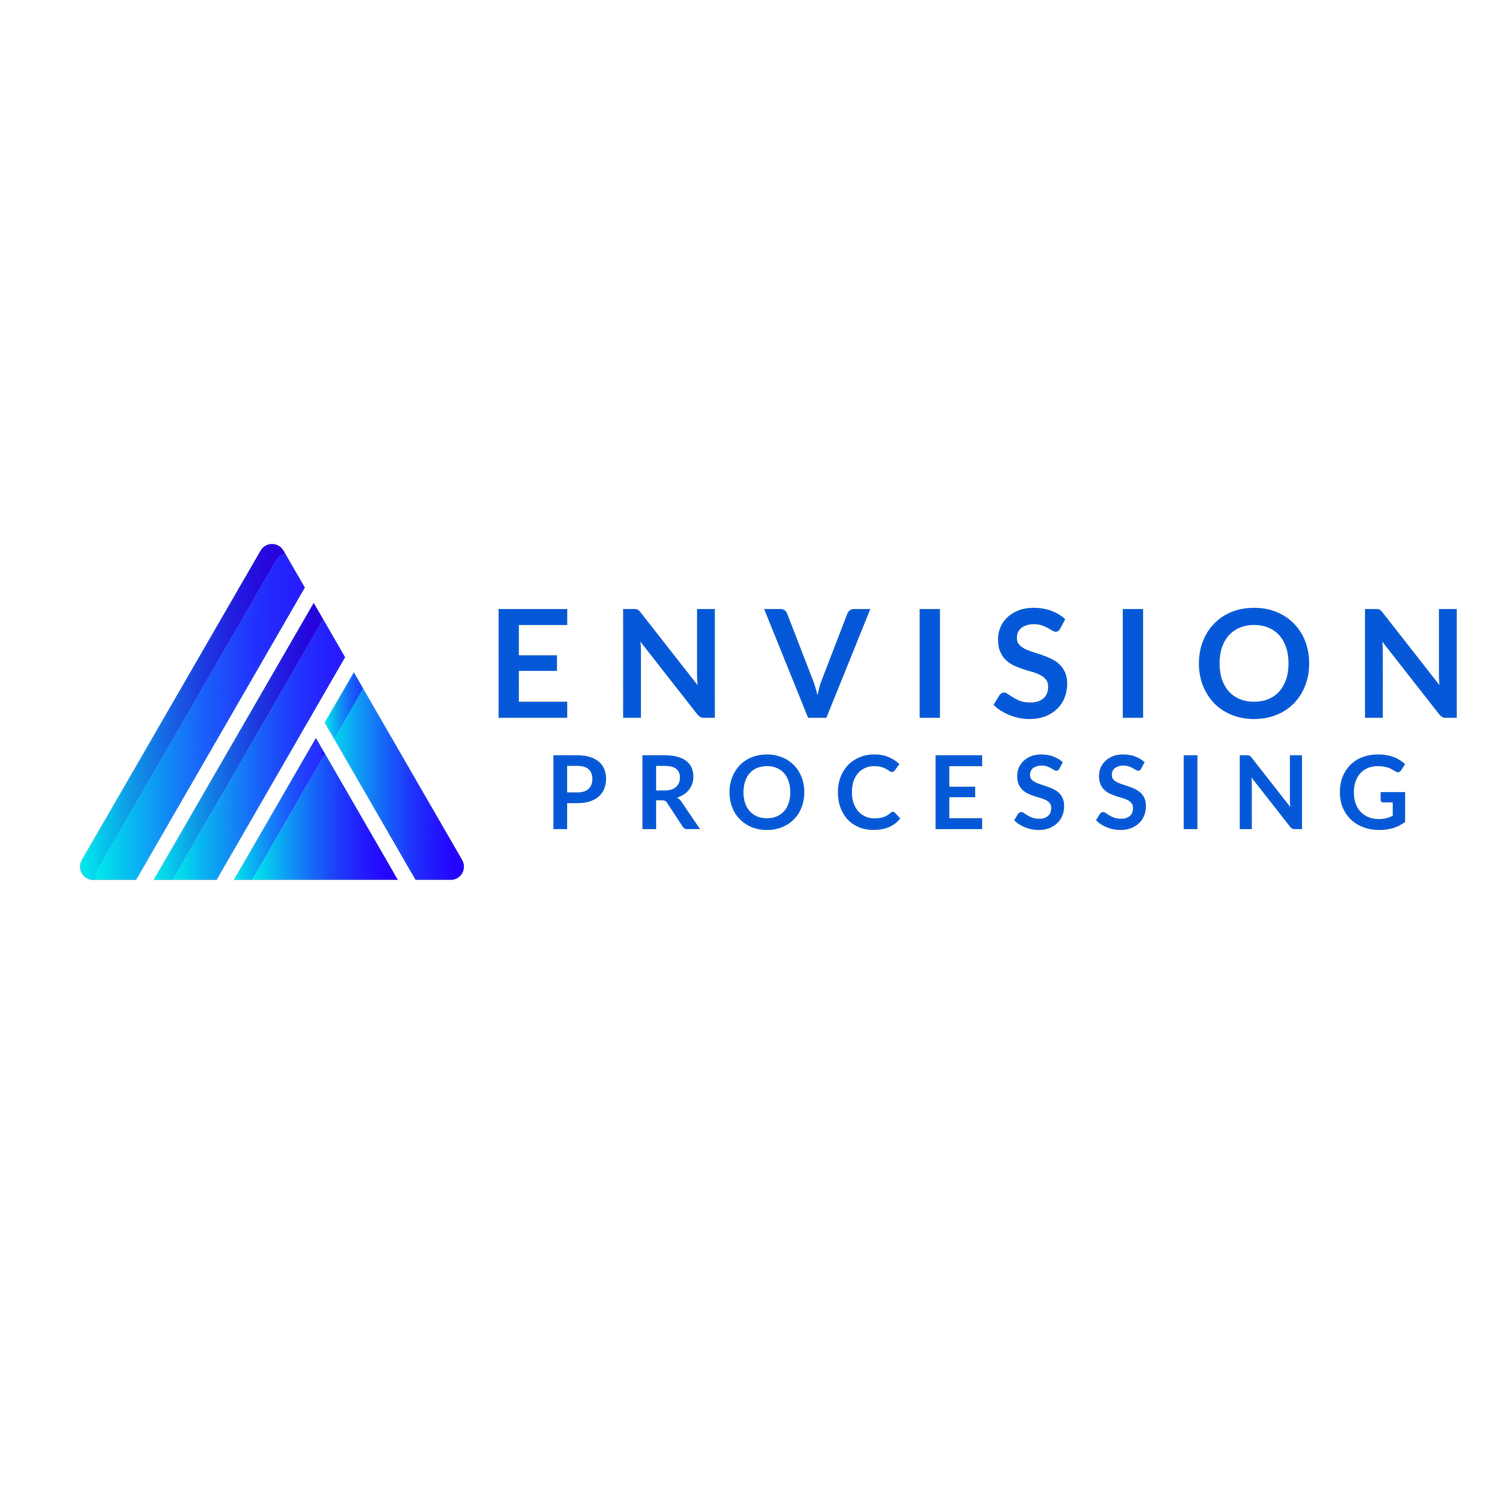 Envision Processing